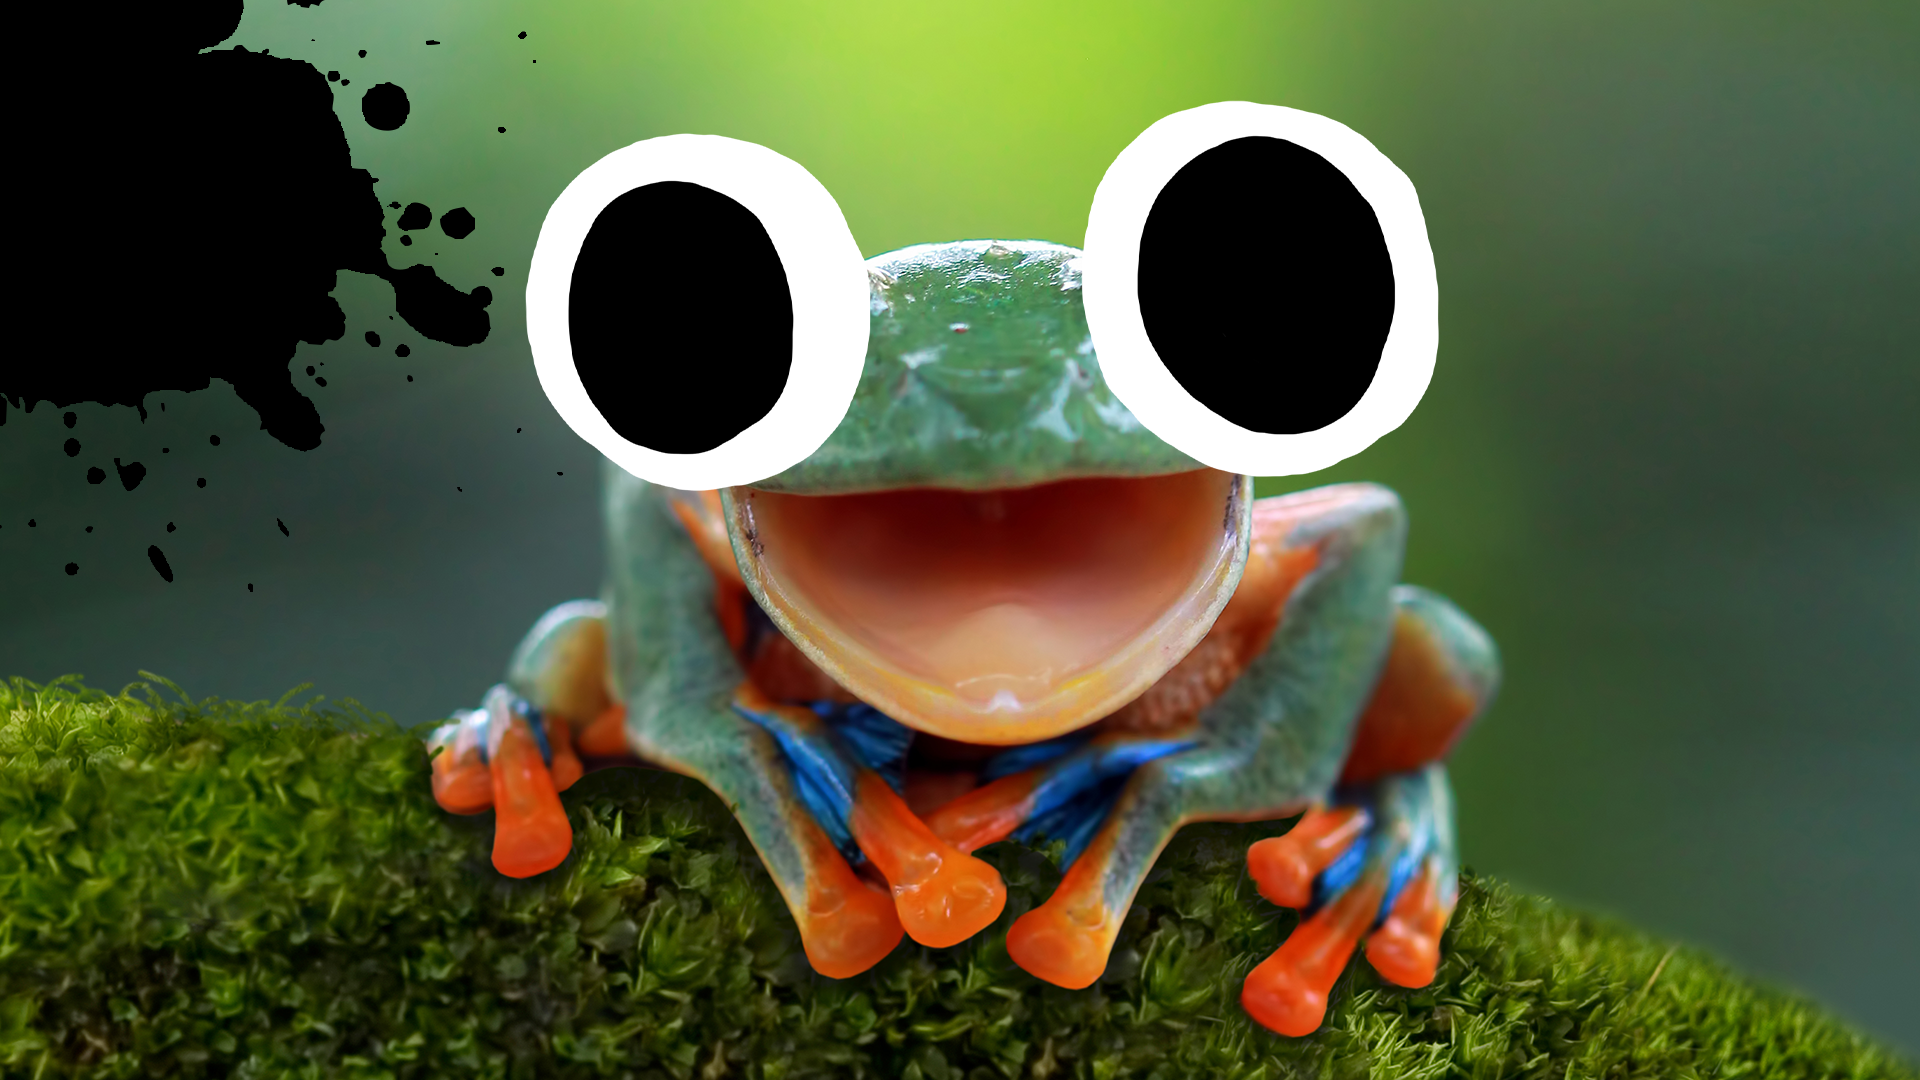 Frog with googly eyes and black splat